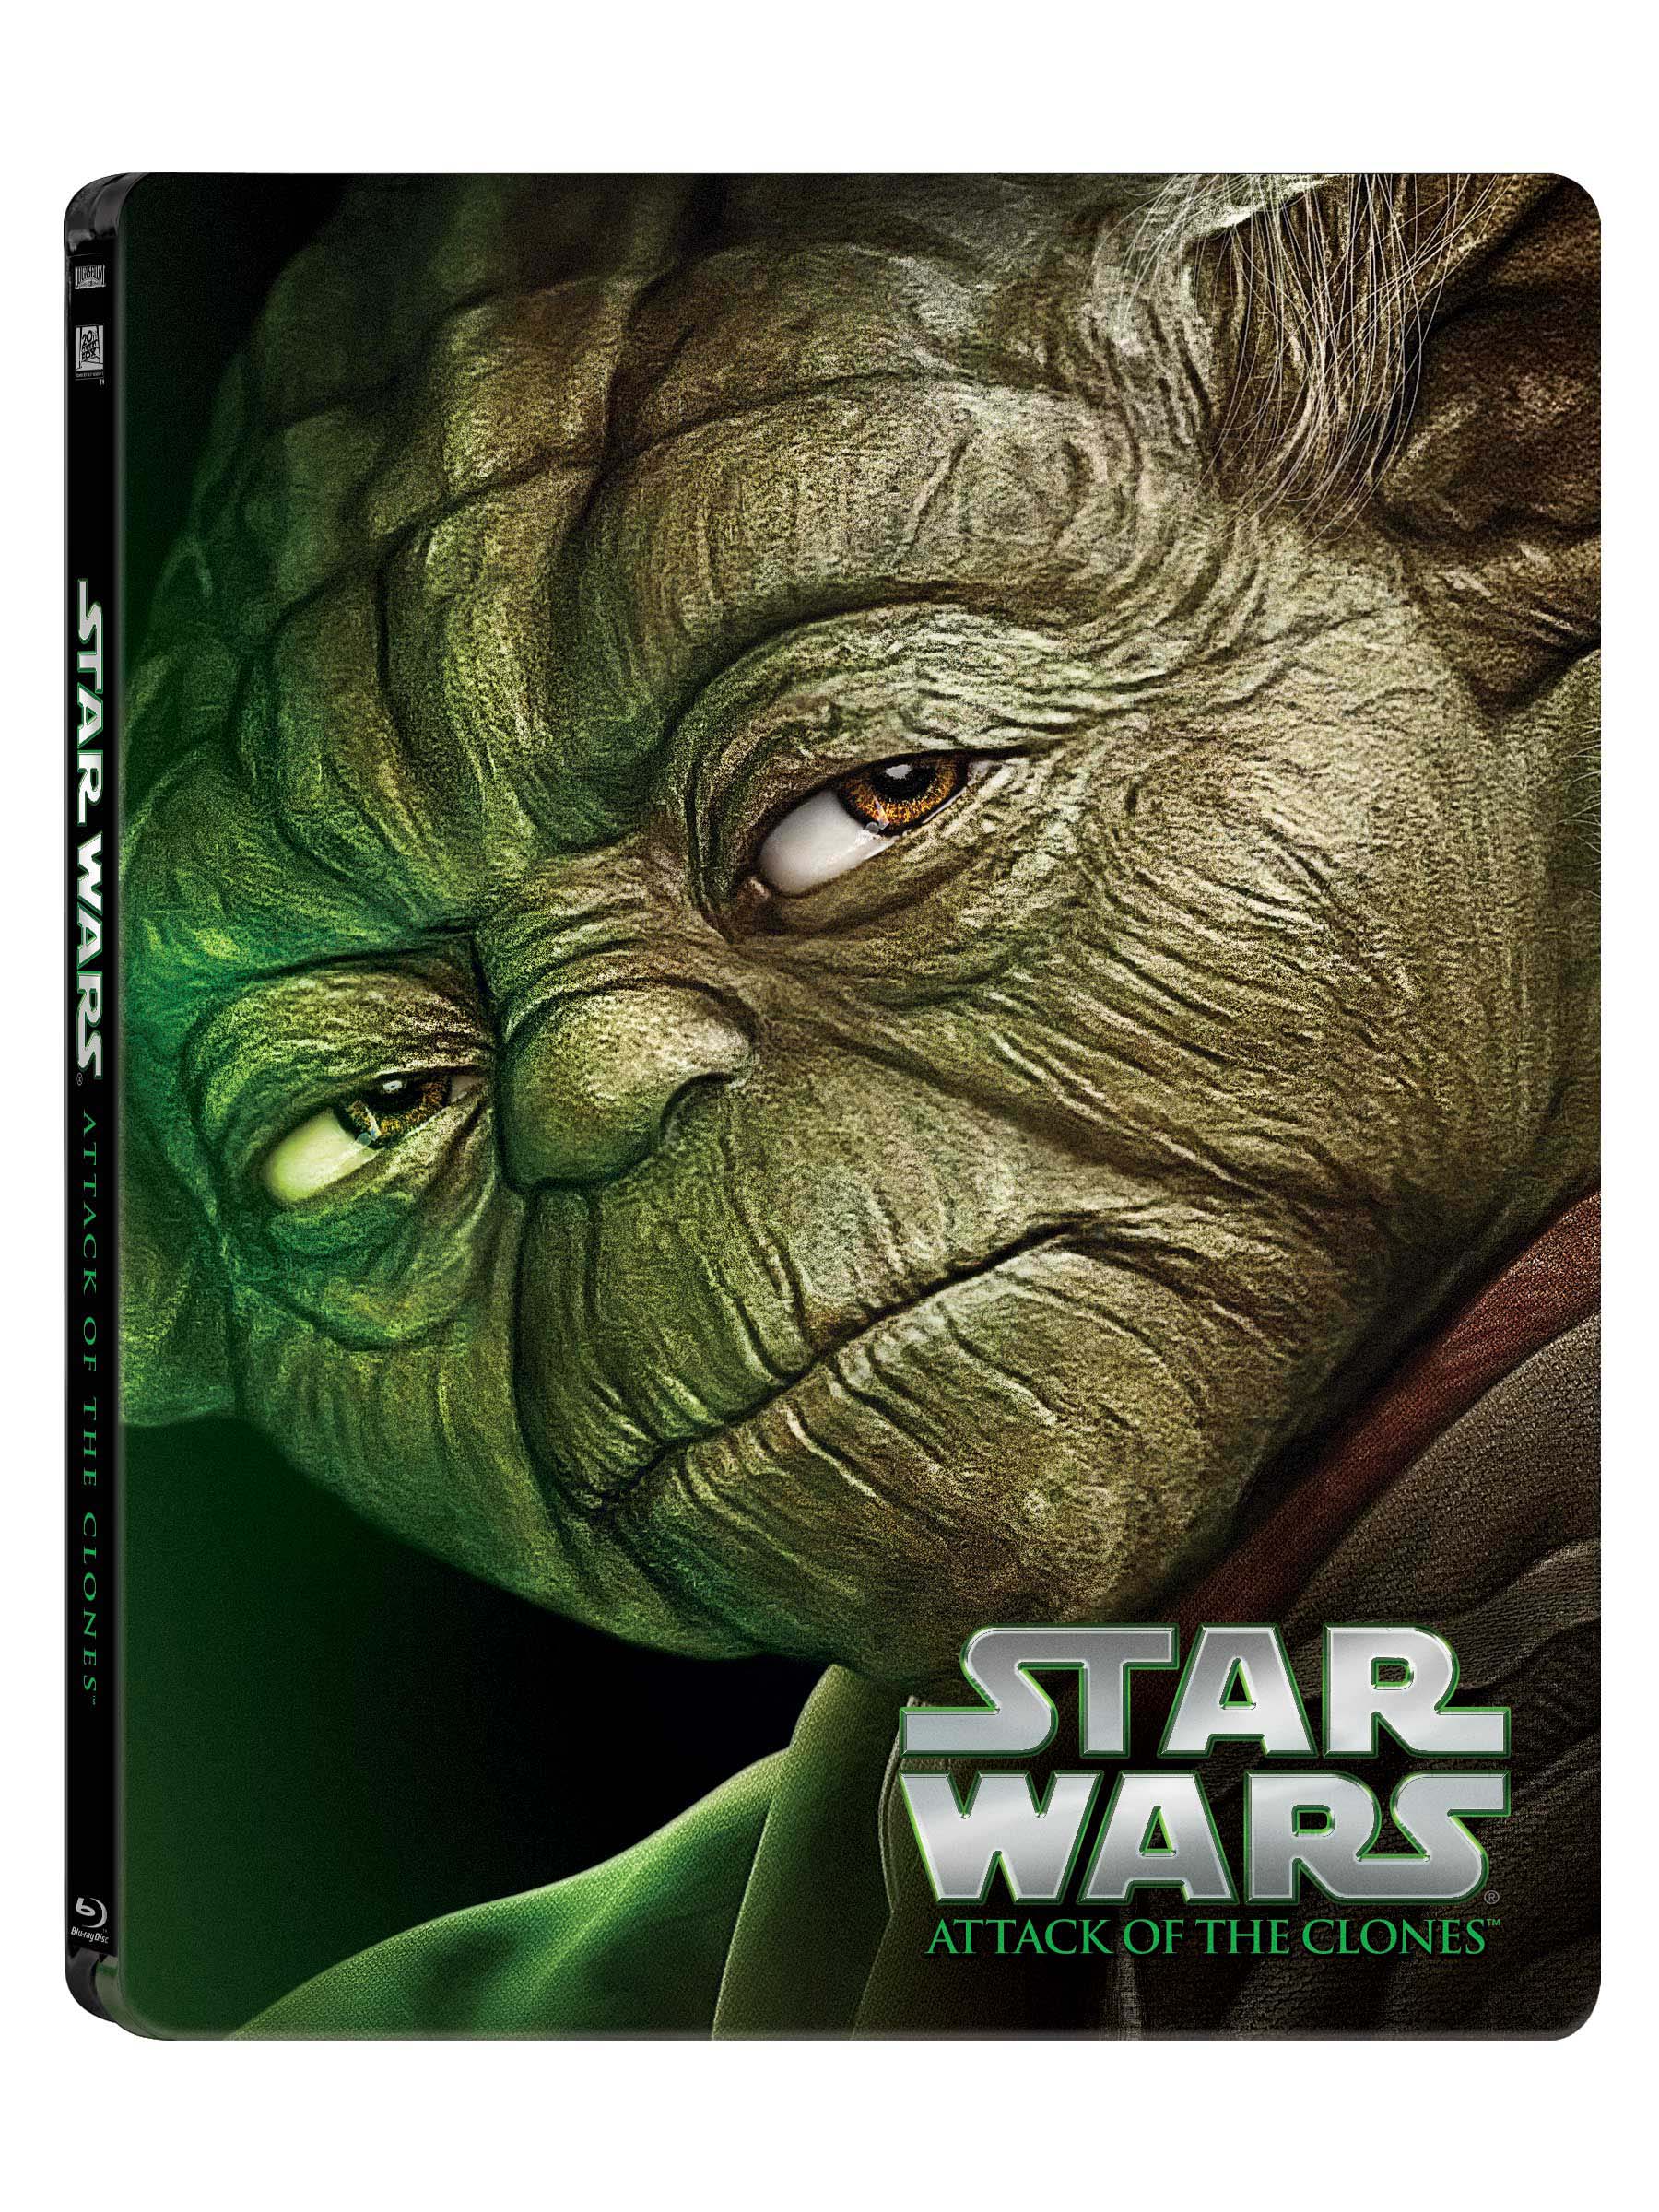 Star Wars: Attack of the Clones (Blu-ray, 2015)